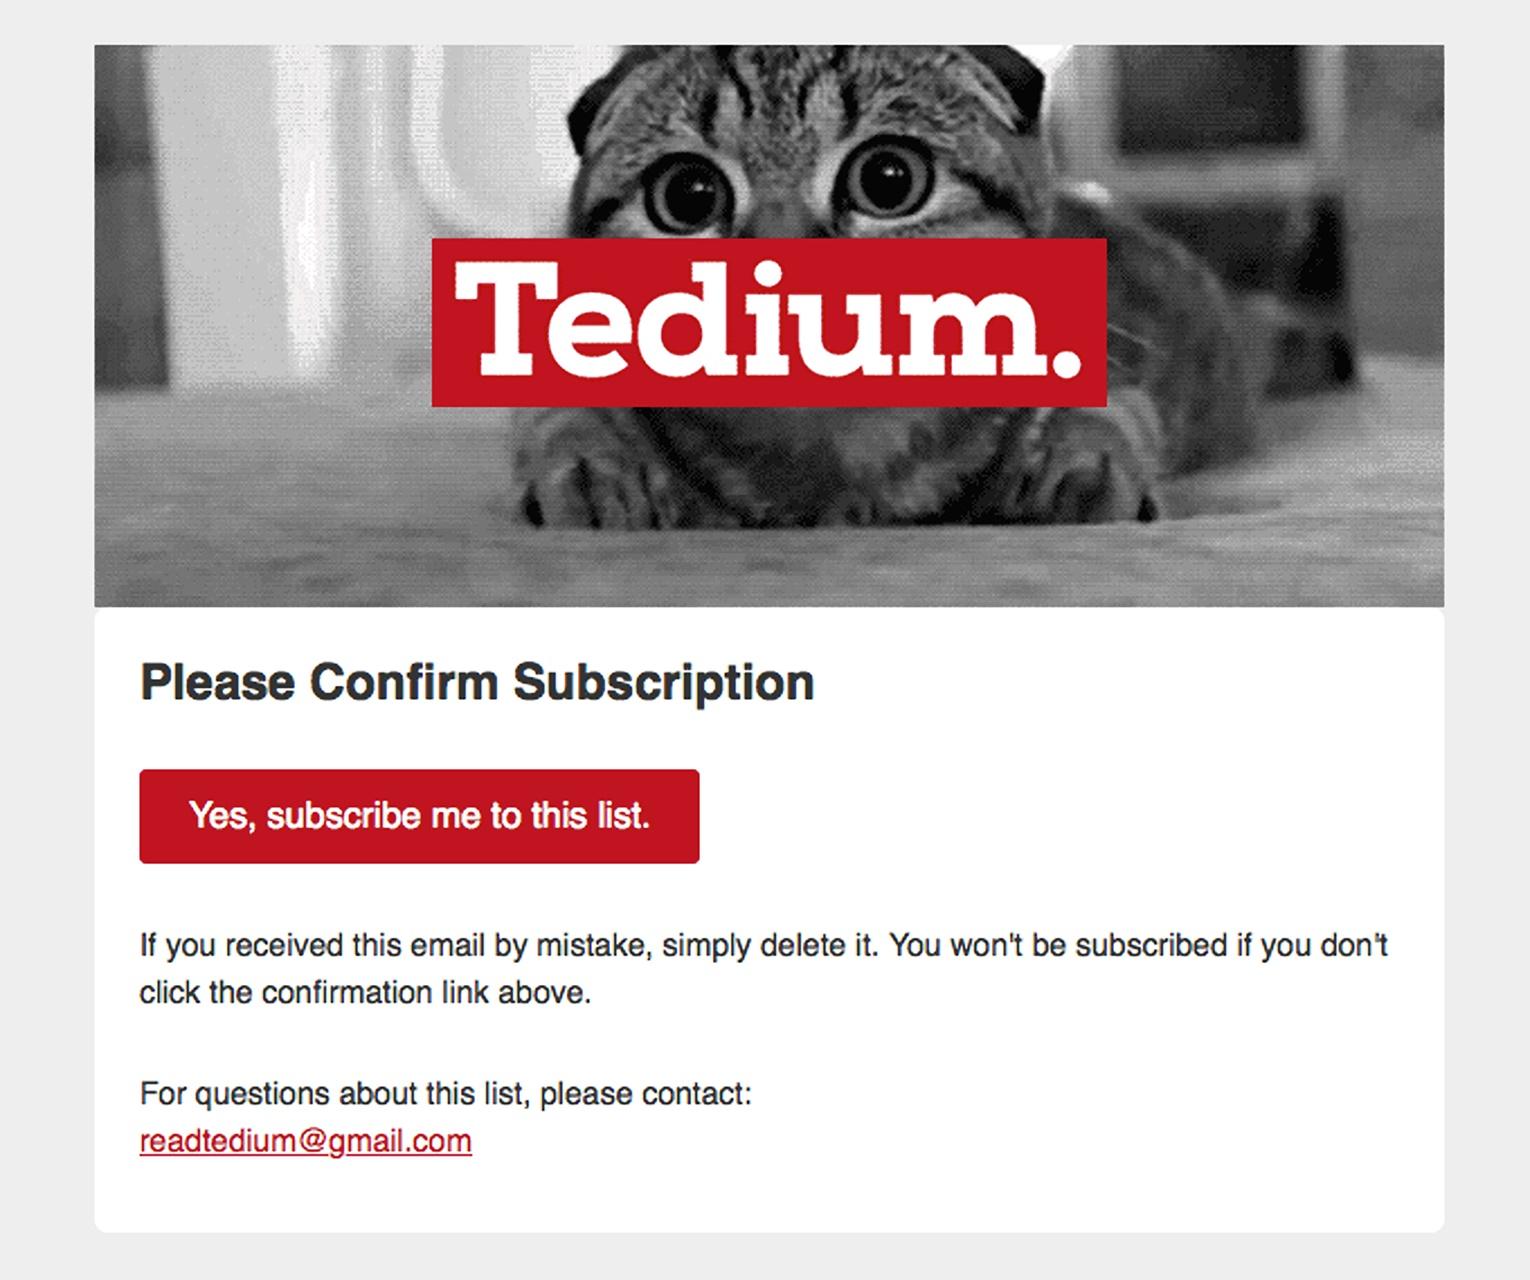 Email example from Tedium